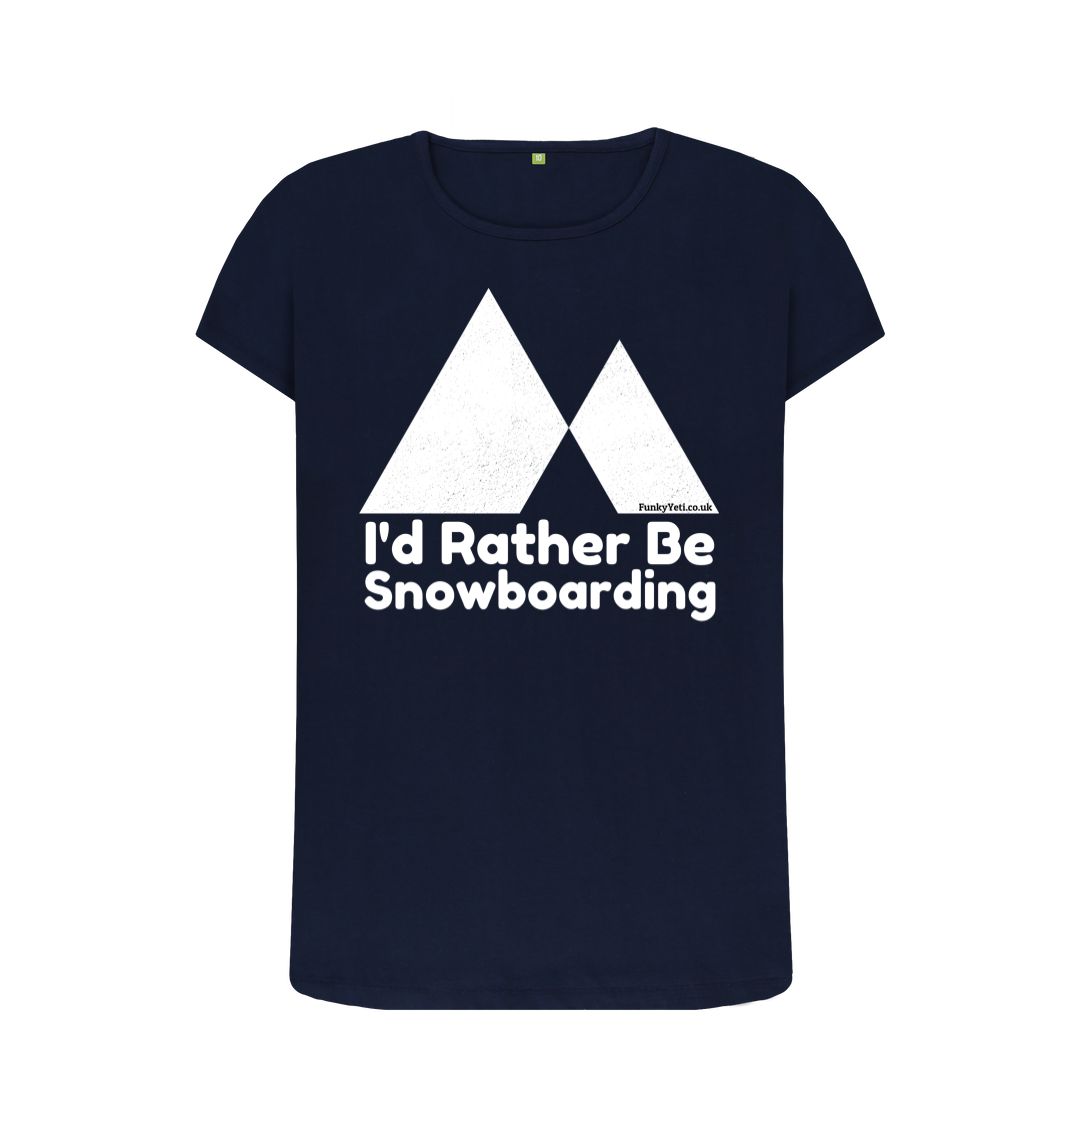 Navy Blue Funky Yeti Women's Tee - I'd Rather Be Snowboarding